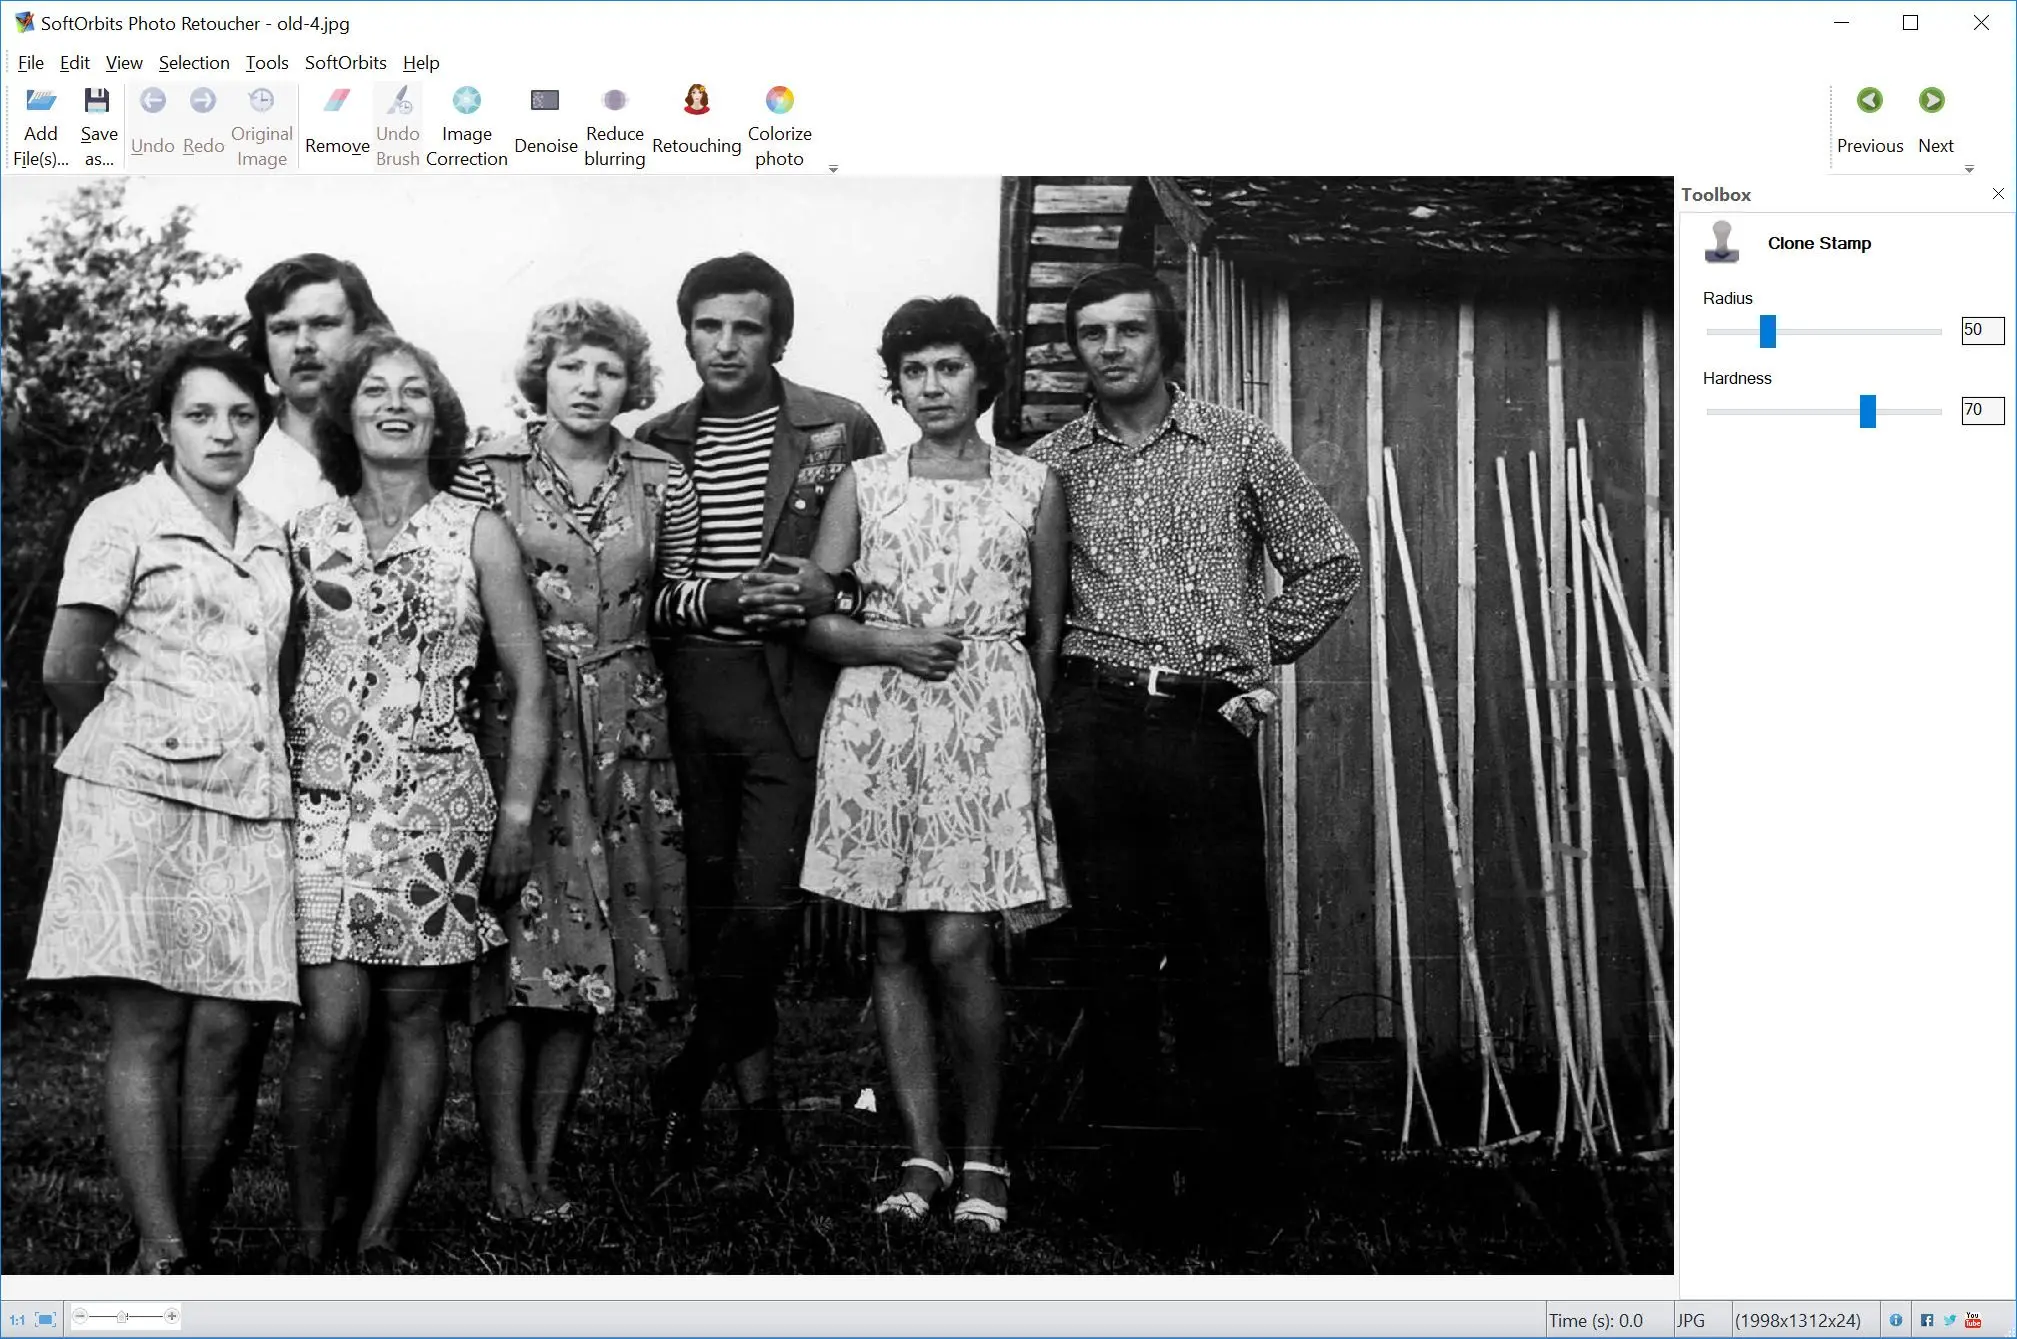 Restore damaged parts of old photo manually.